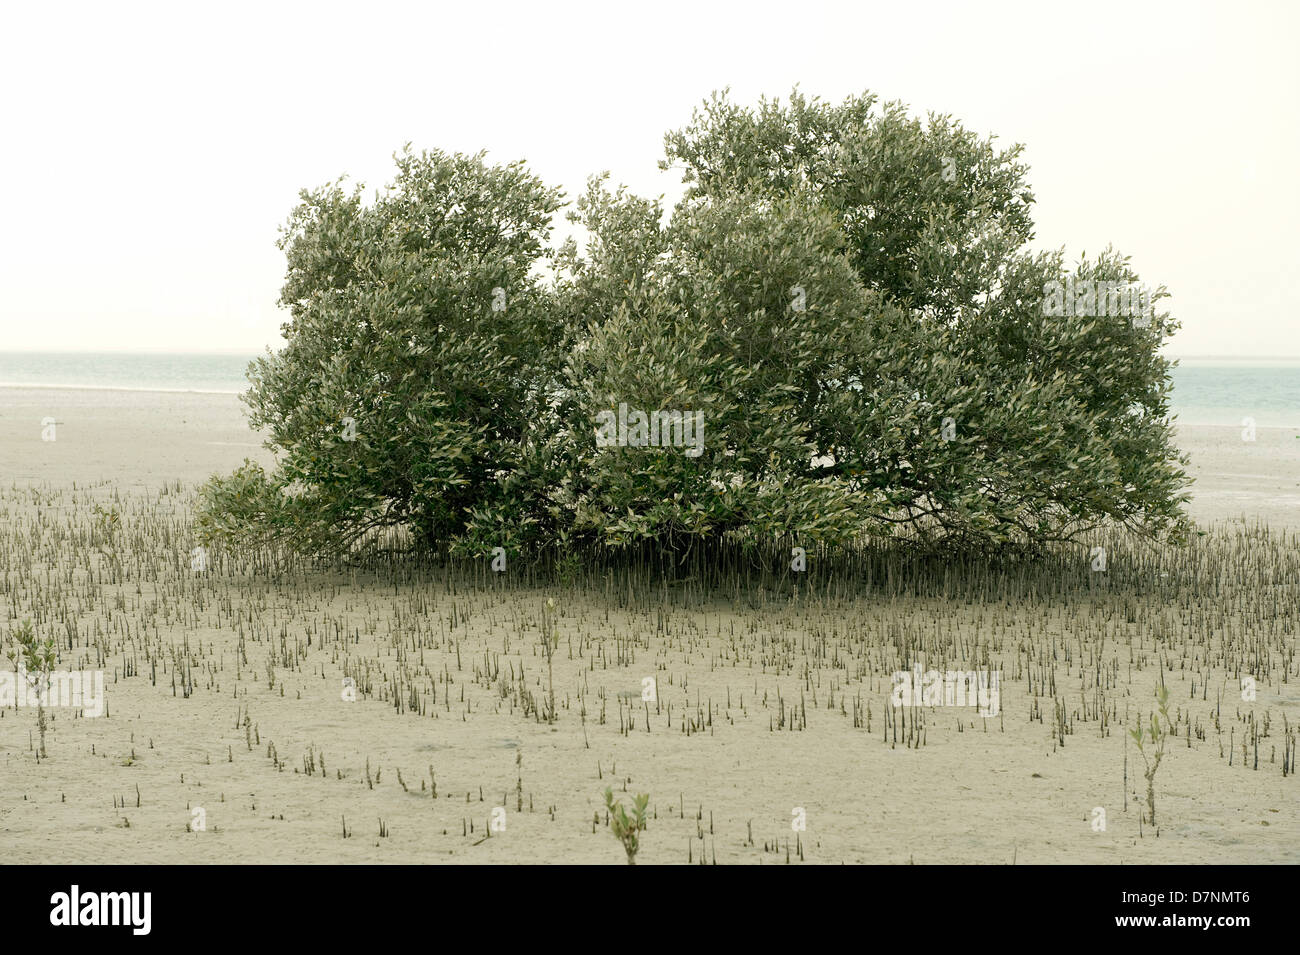 A mature grey mangrove, Avicennia marina, tree at low tide with aerial roots or pneumatophores sticking up above the sand Stock Photo